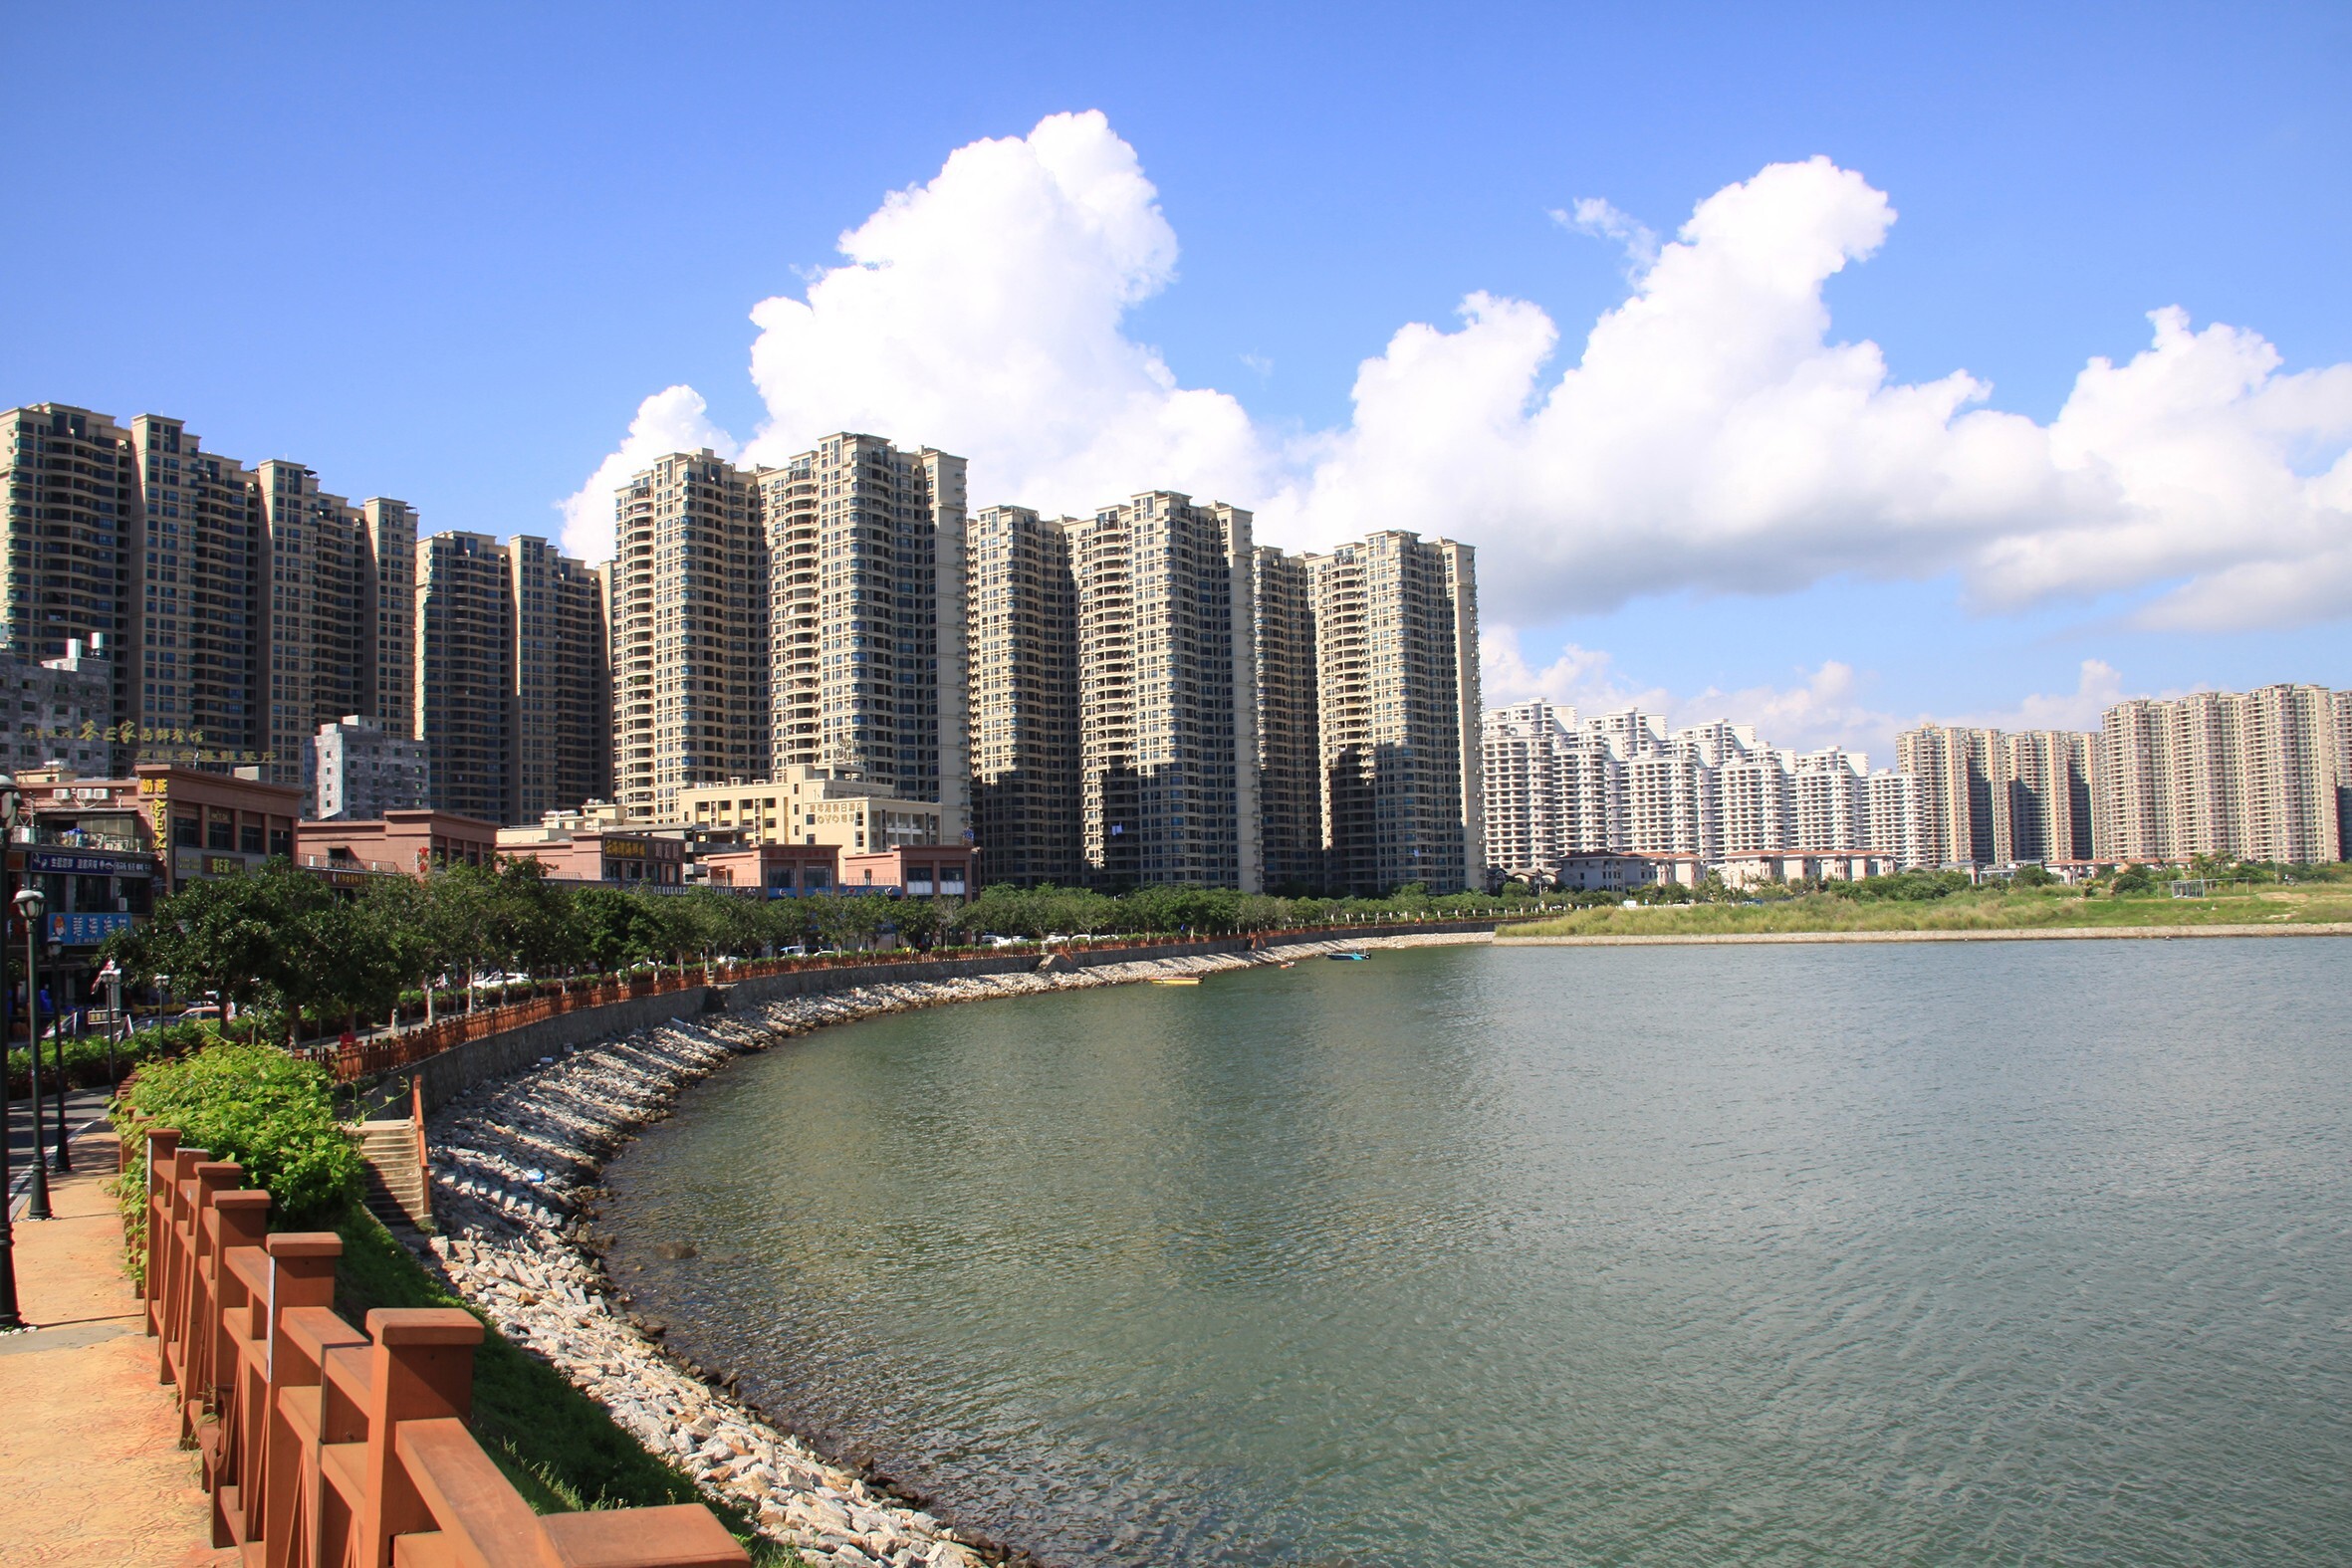 The Greater Bay Area city of Huizhou in Guangdong province has come with measures to maintain stability in the property market. Photo: Shutterstock